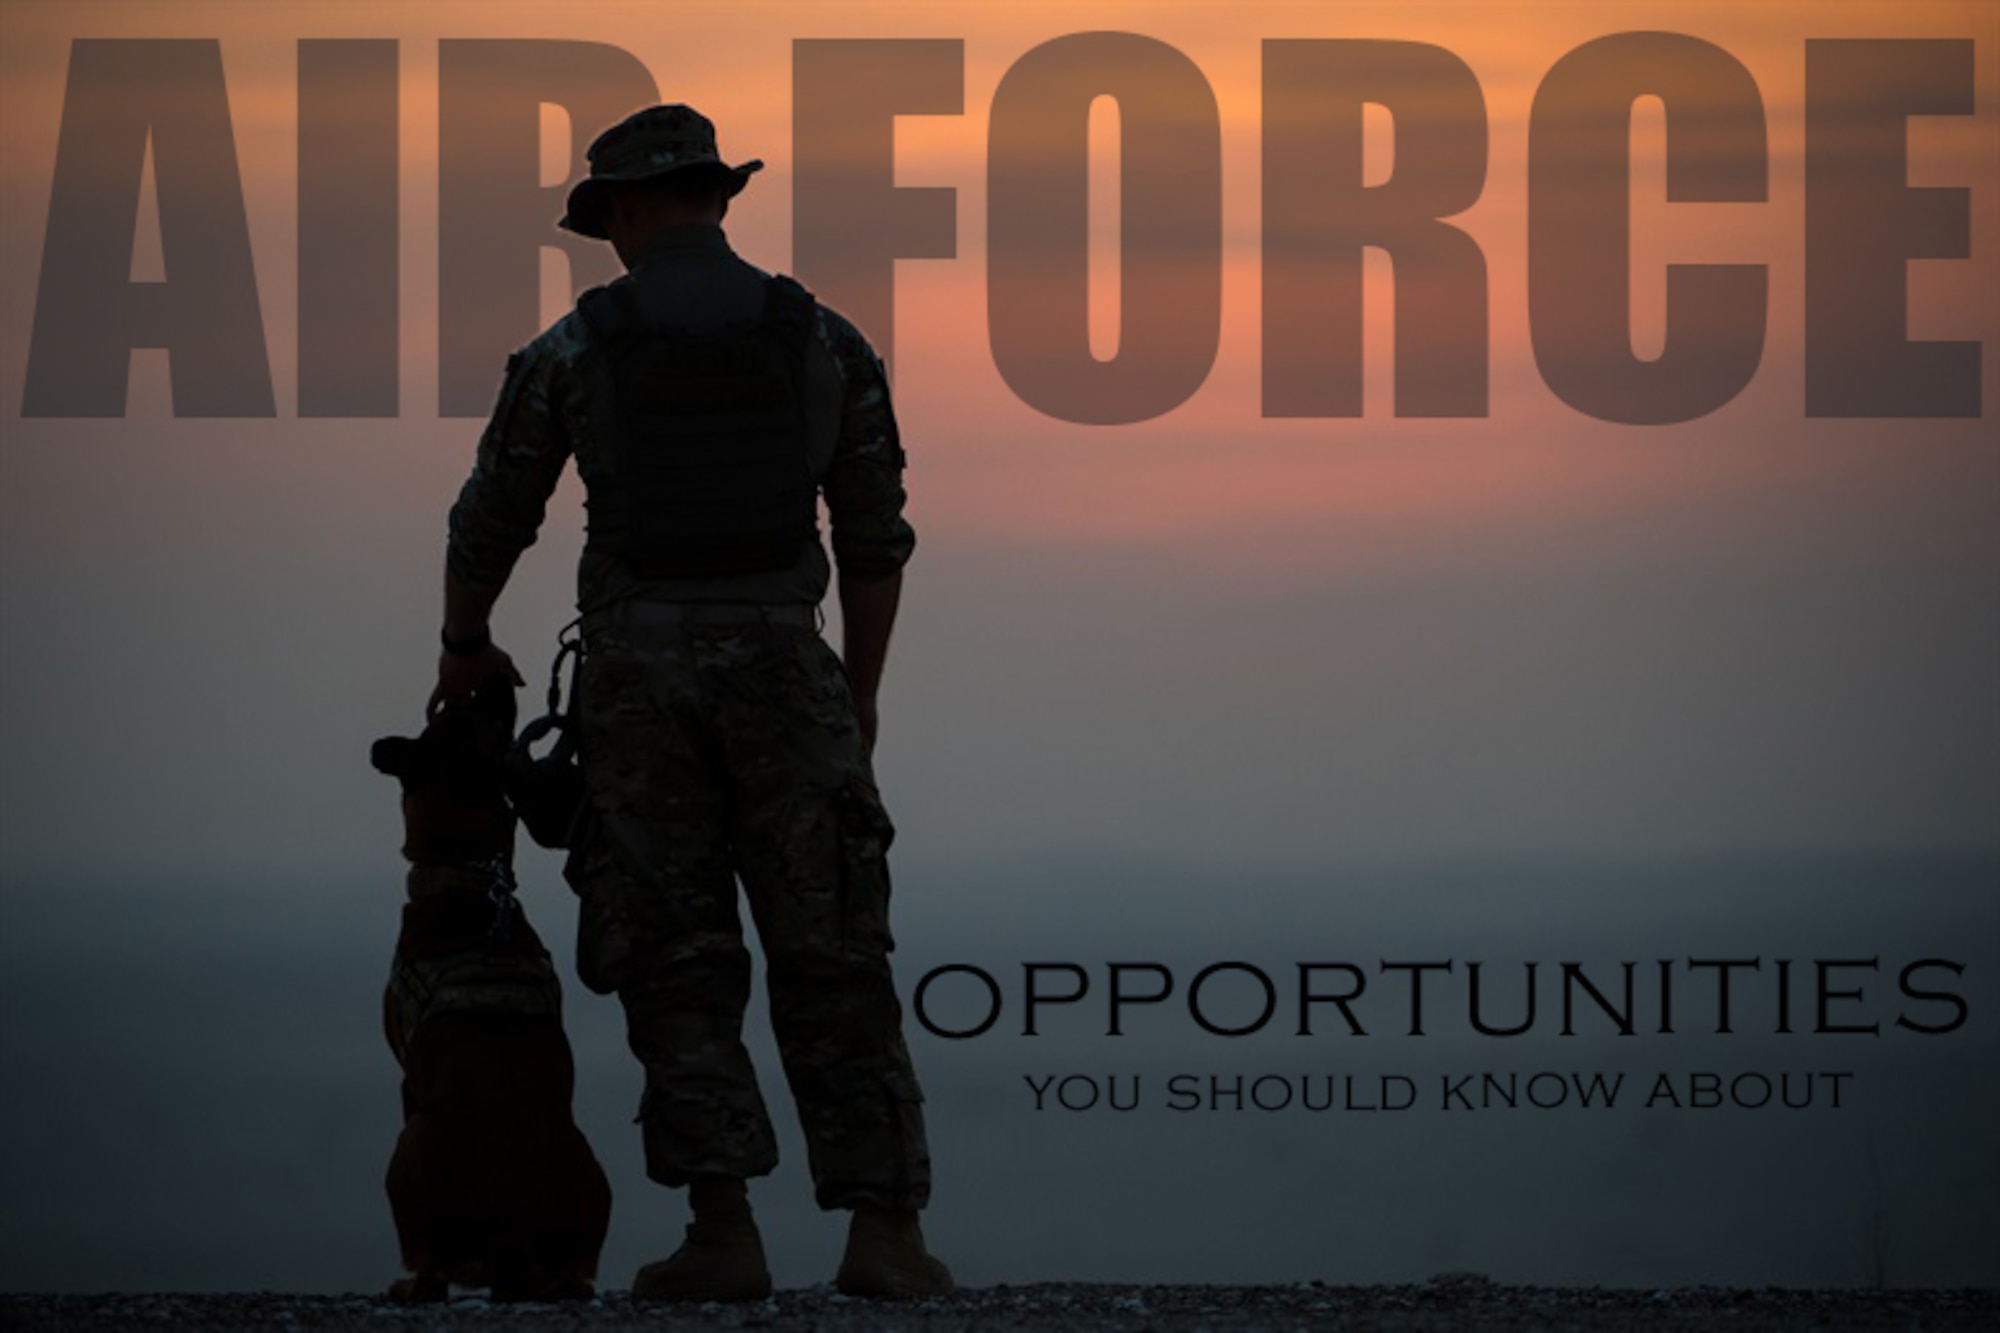 The Air Force offers Airmen many opportunities for career change and development.